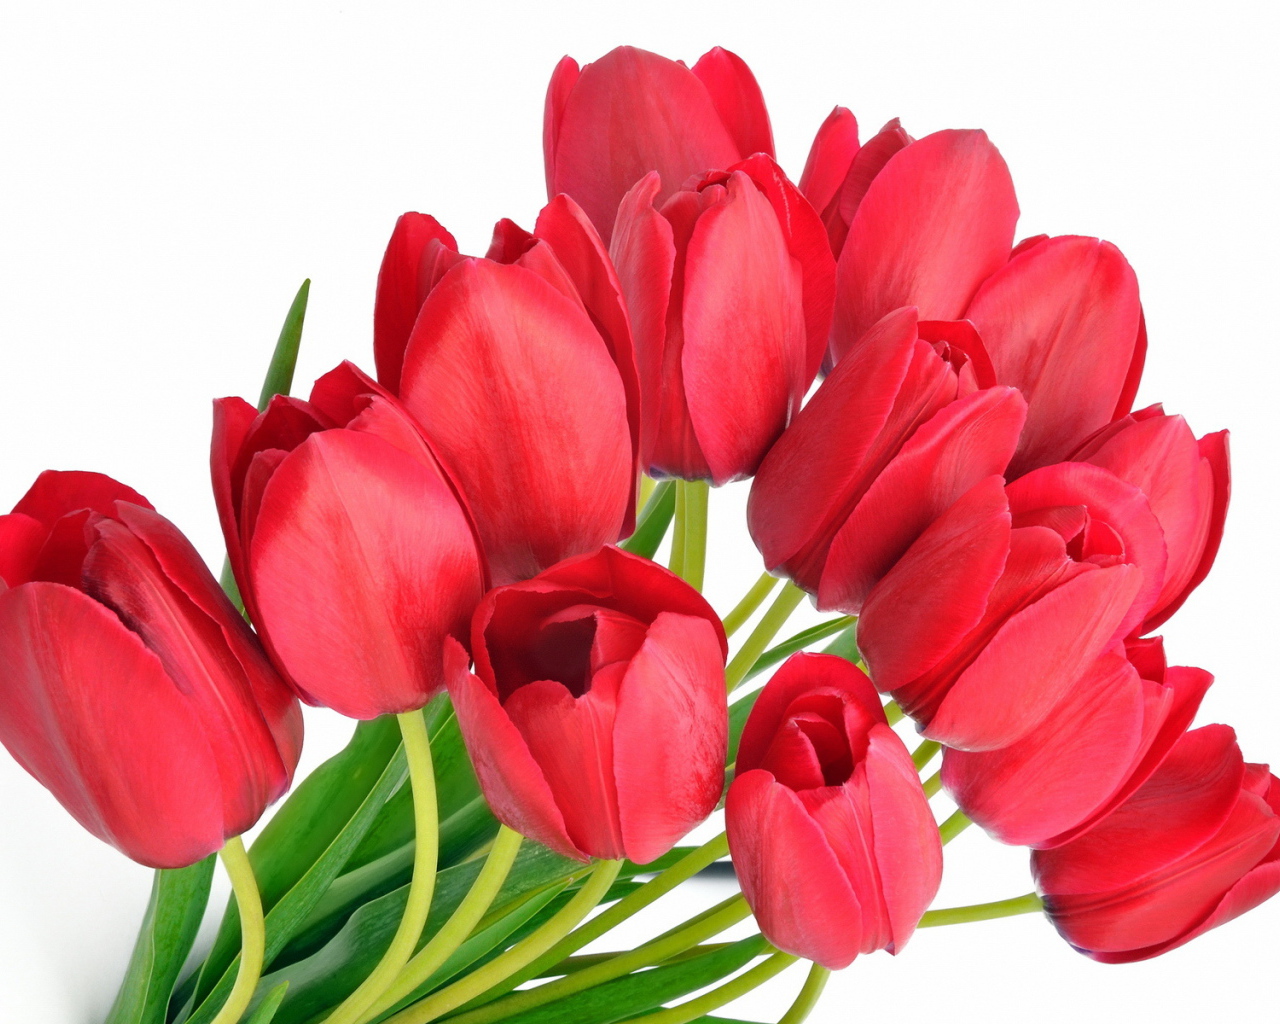 Red tulips on March 8